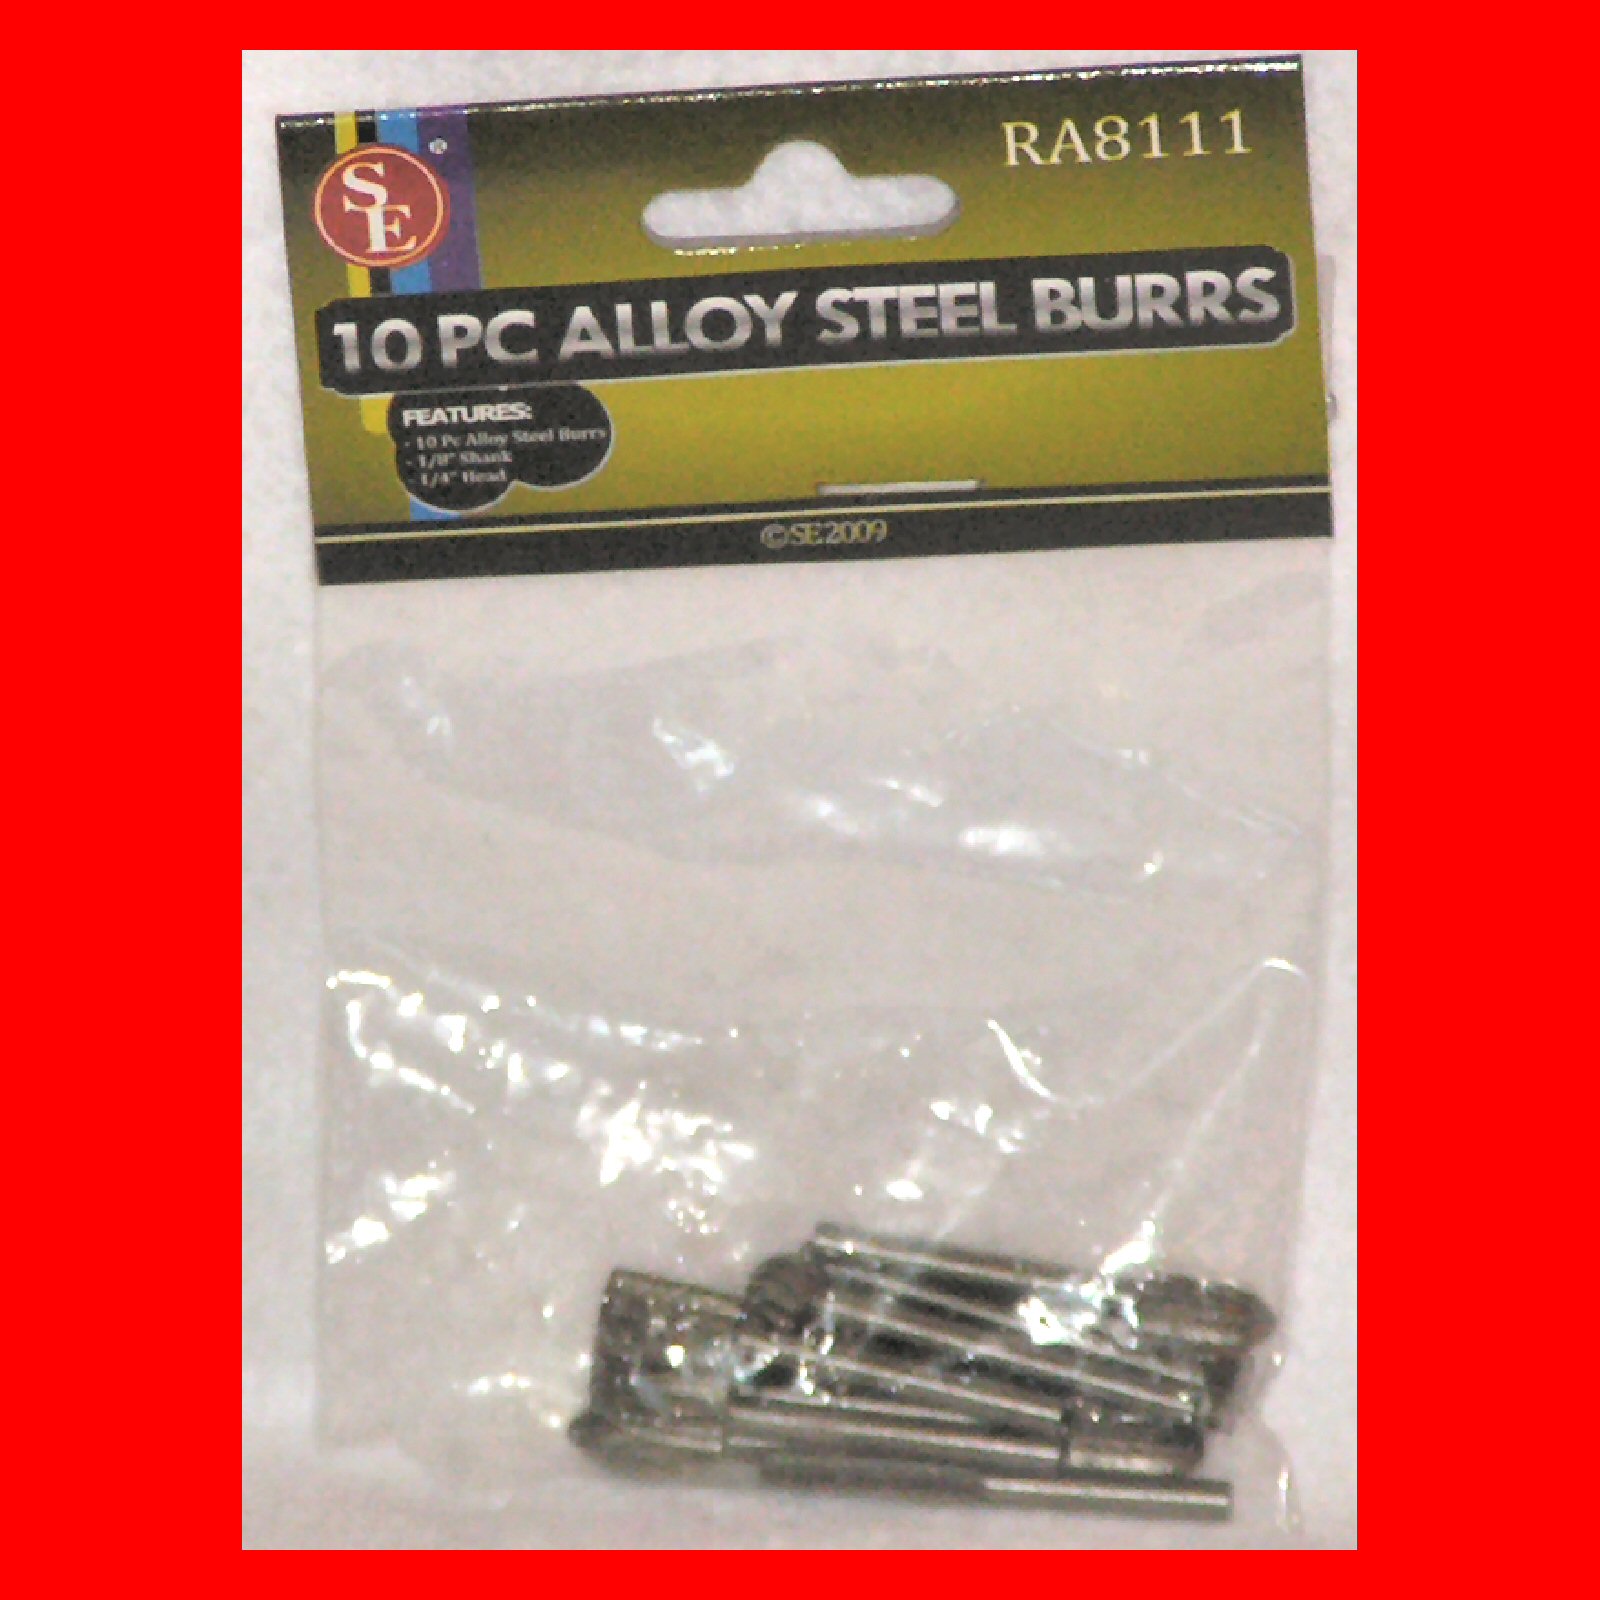 10-pc Rotary Tool Alloy Steel Burrs 1/4-inch Heads